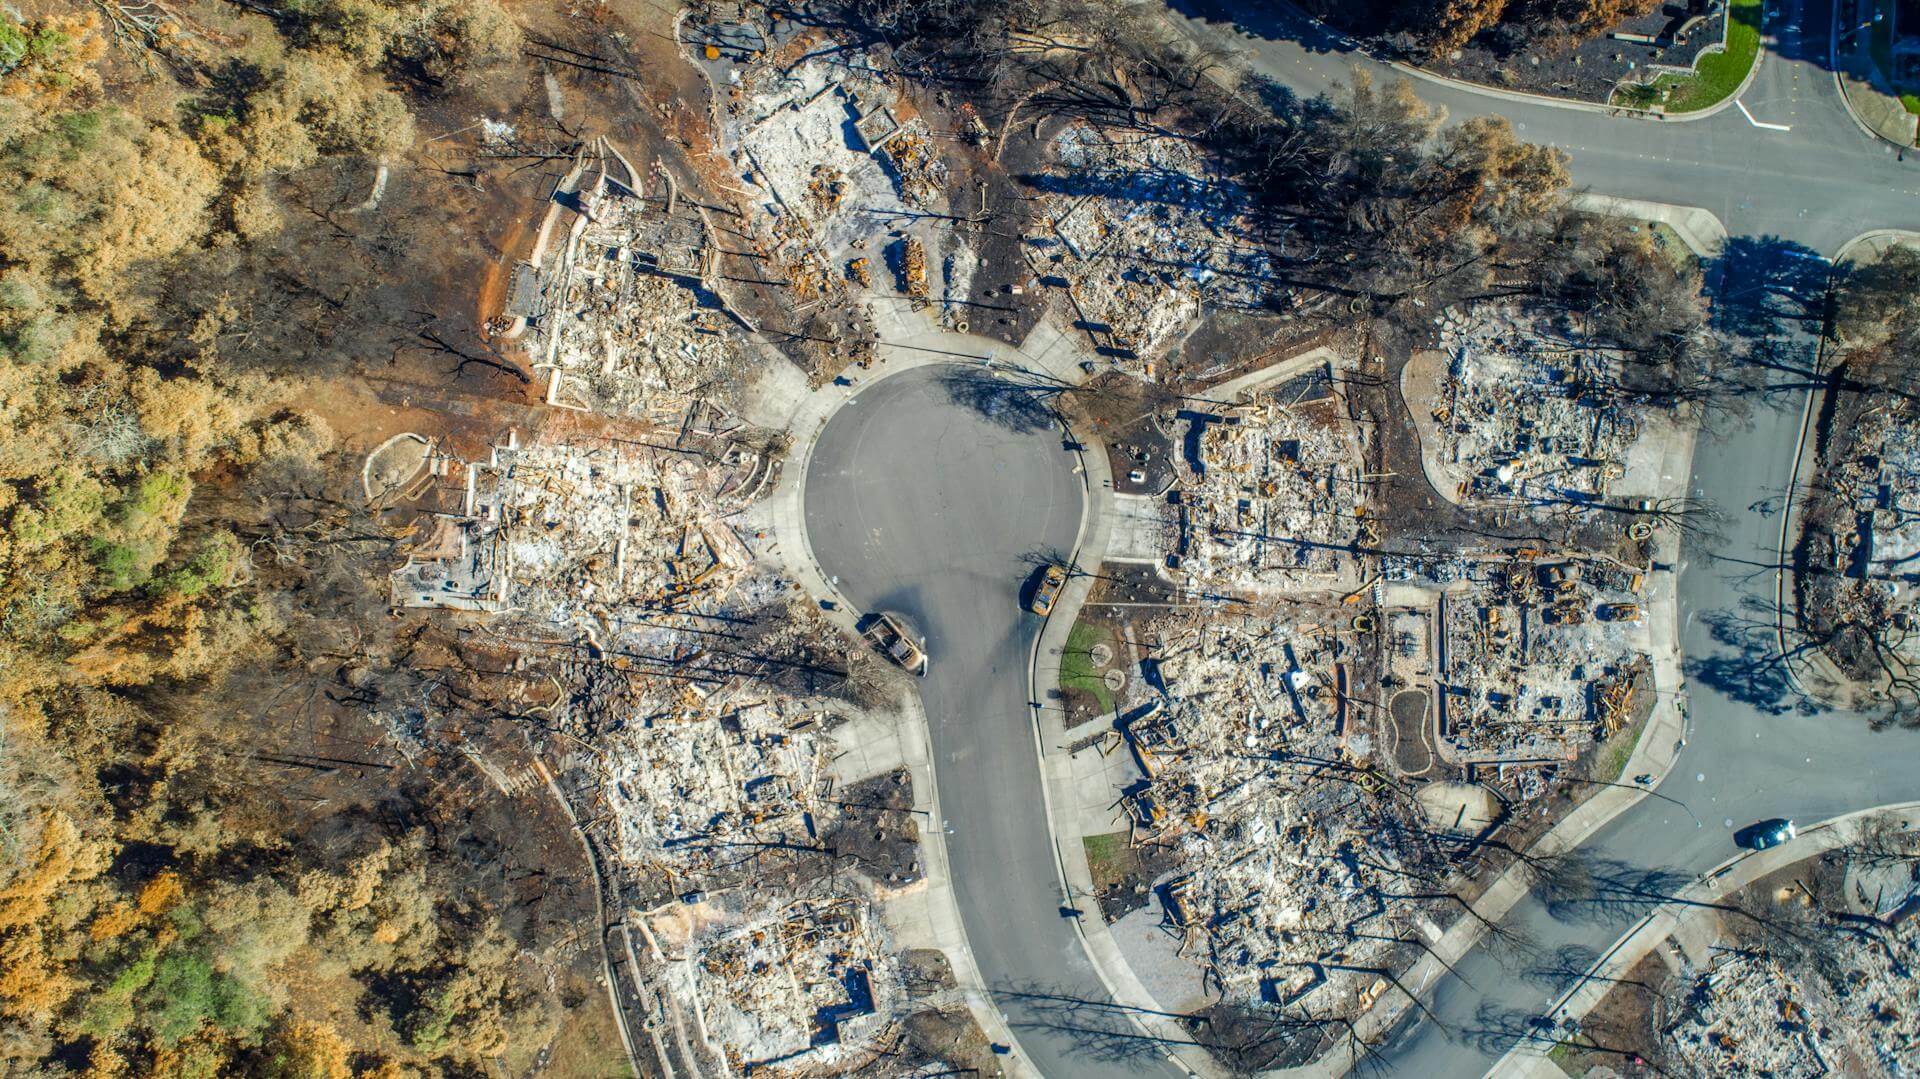 What happens after a wildfire